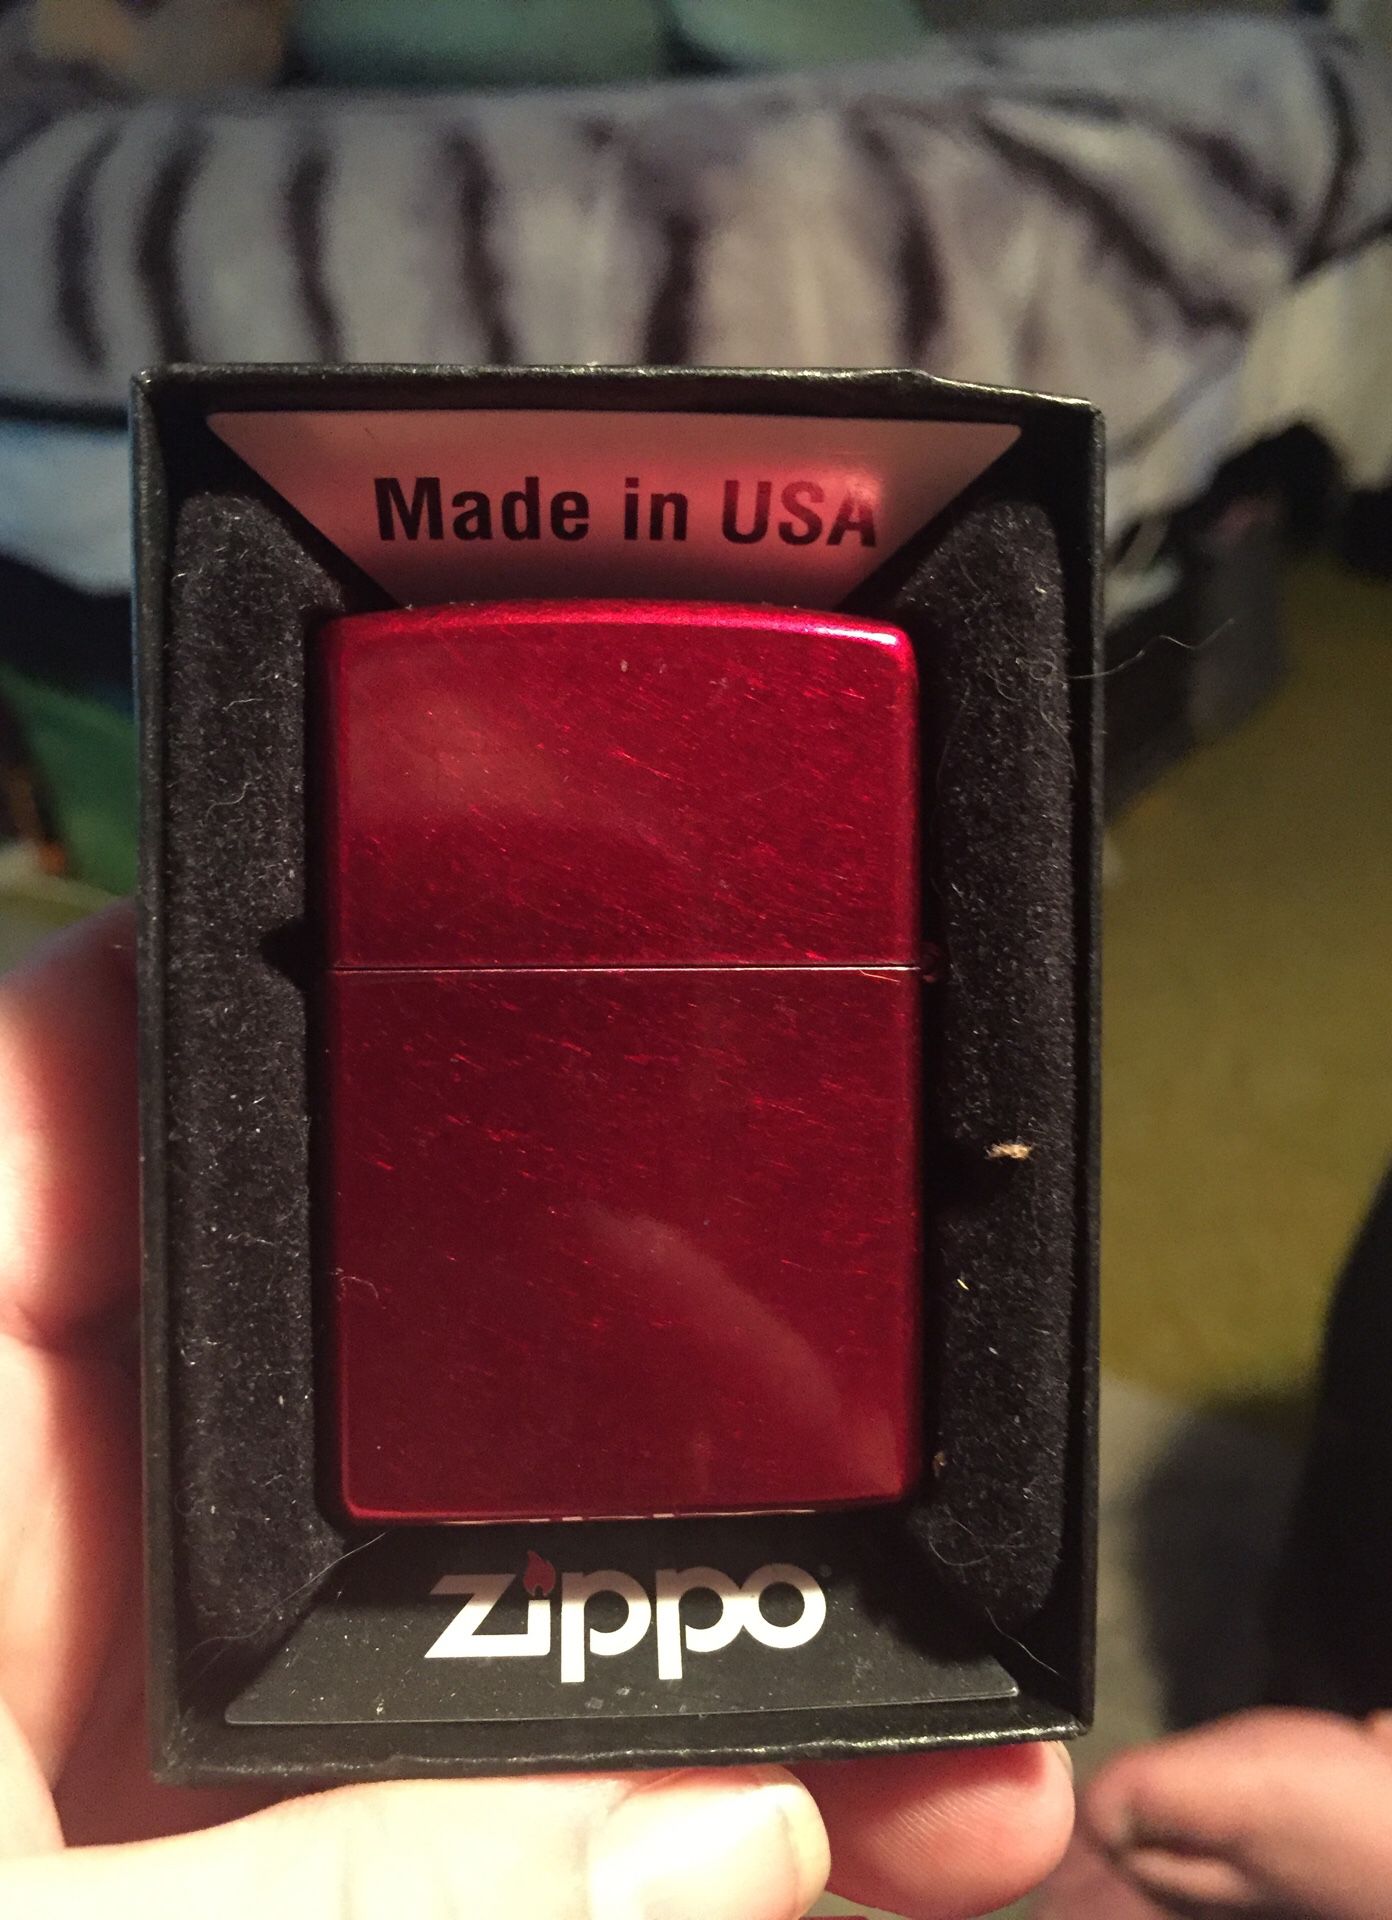 2 Zippo Lighters, red one is new